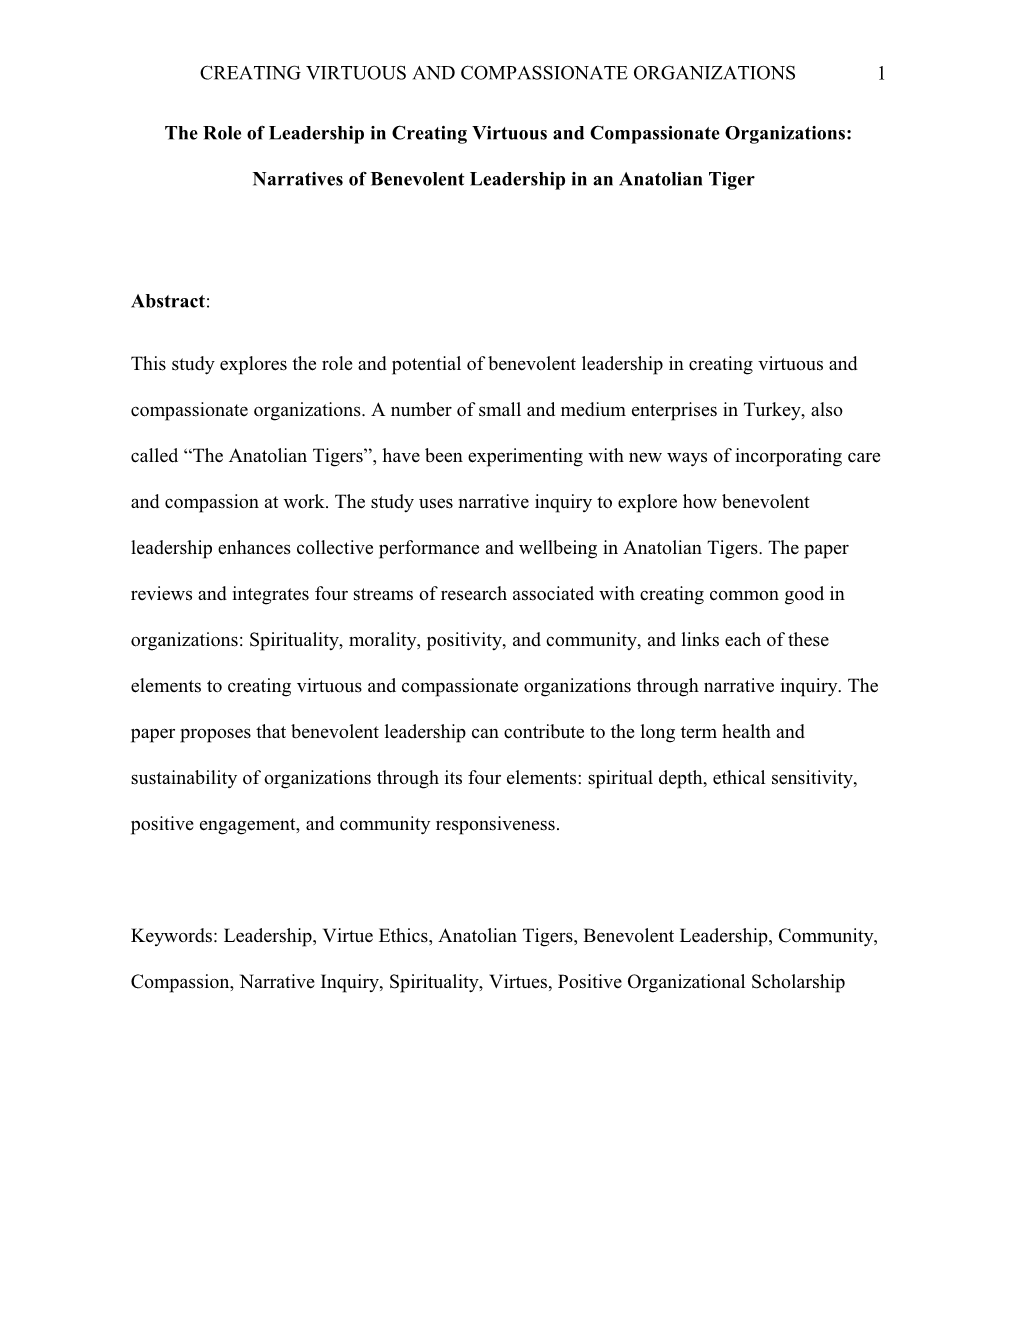 The Role of Benevolent Leadership in Creating Caring and Compassionate Organizations